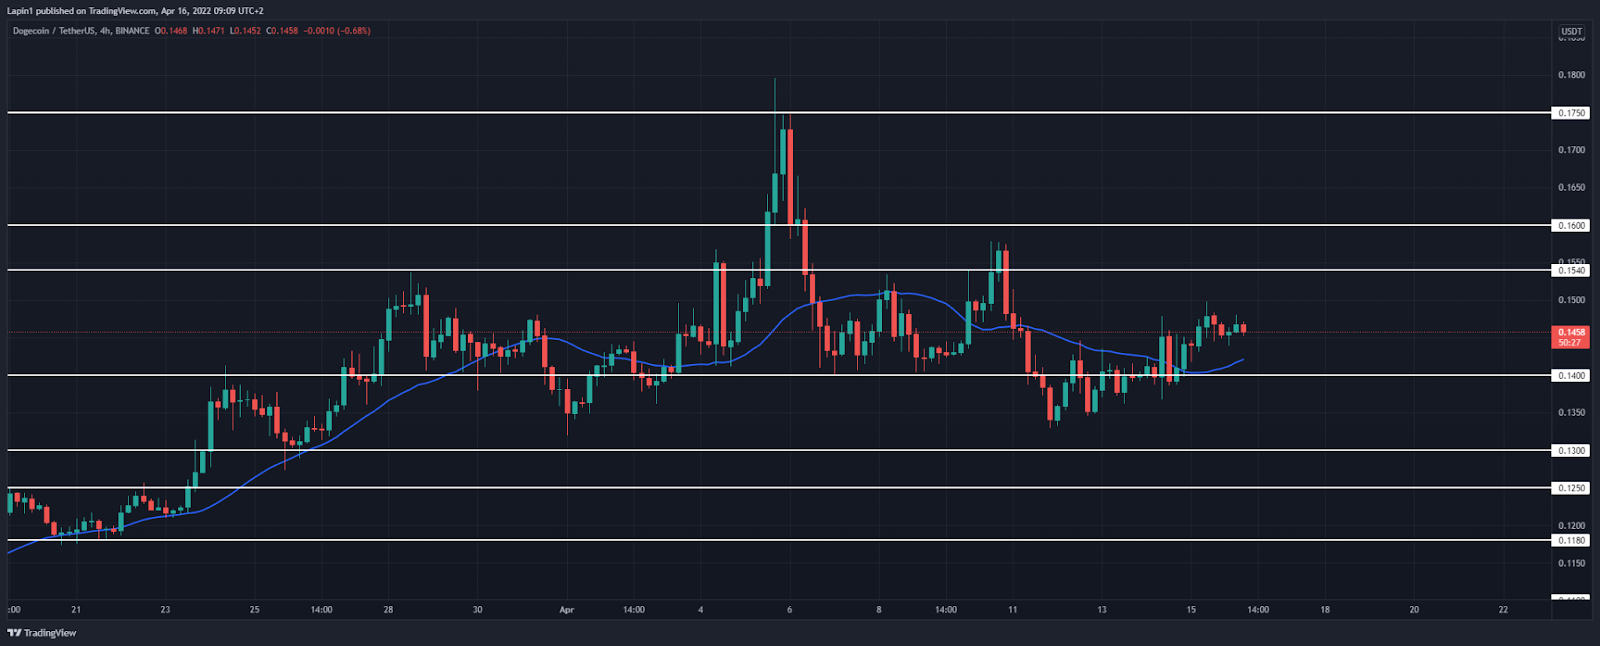 Dogecoin price analysis: DOGE continues to retrace, resistance found at $0.15?